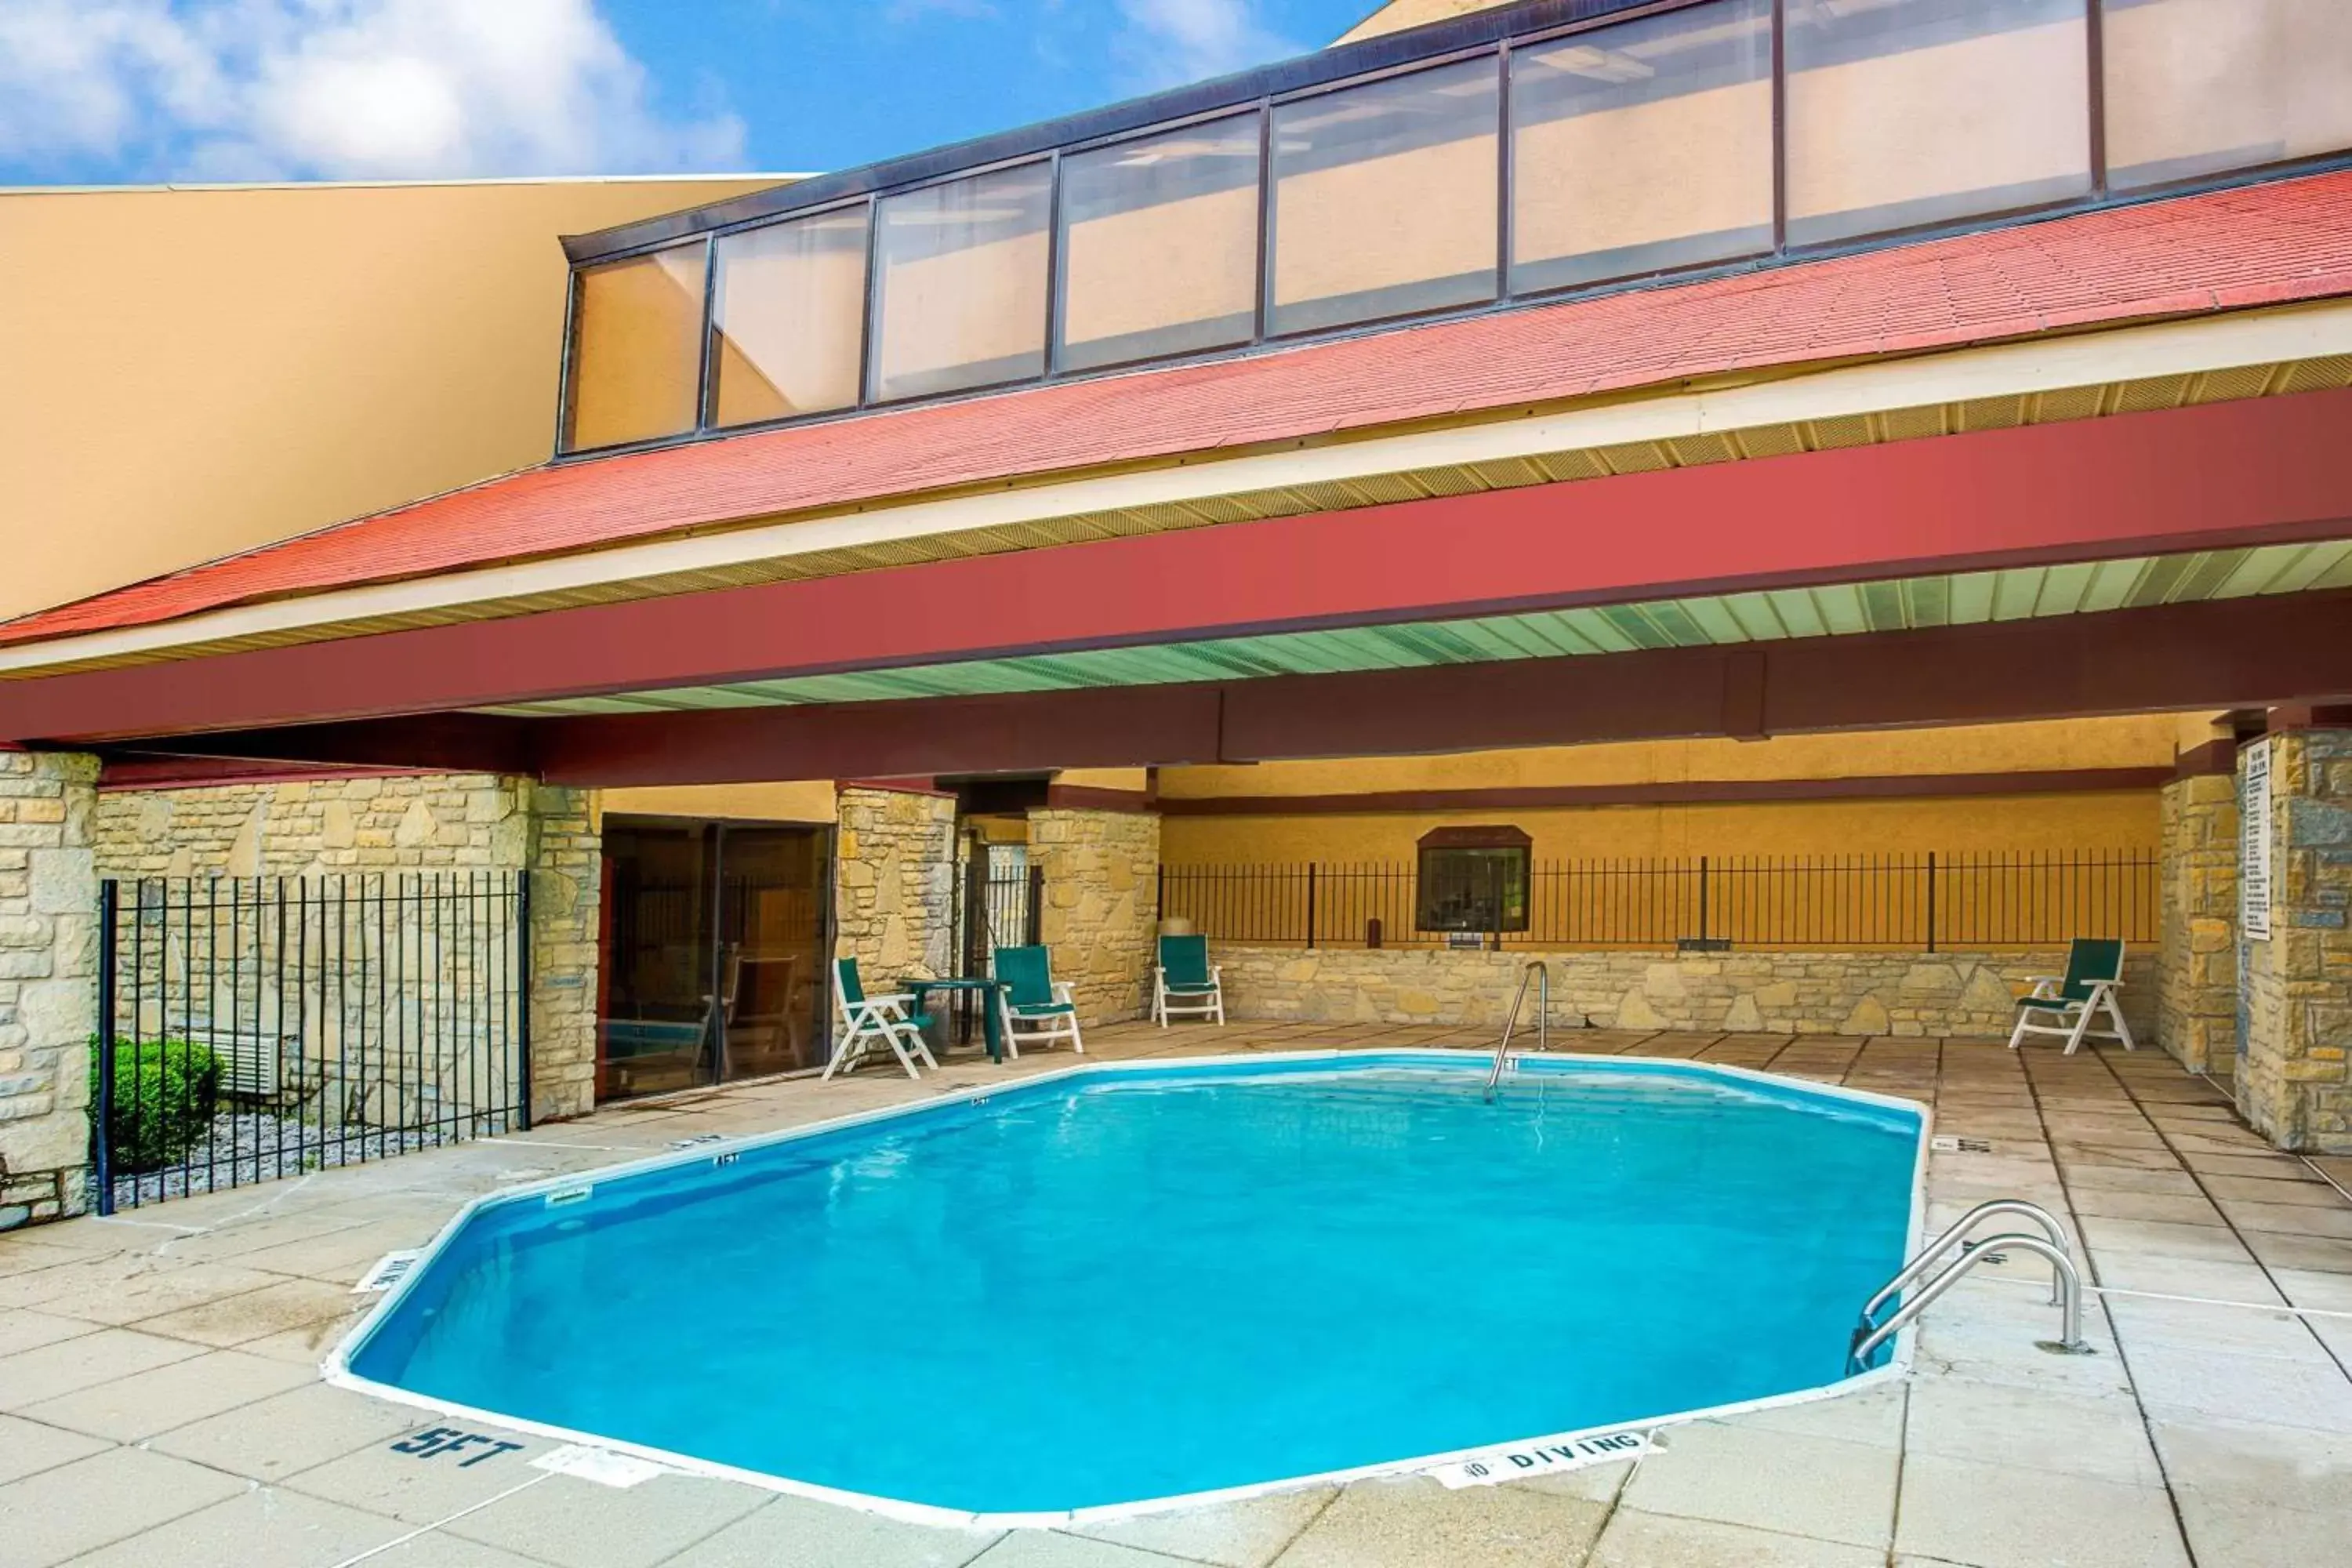 On site, Swimming Pool in Super 8 by Wyndham Fort Mitchell Cincinnati Area